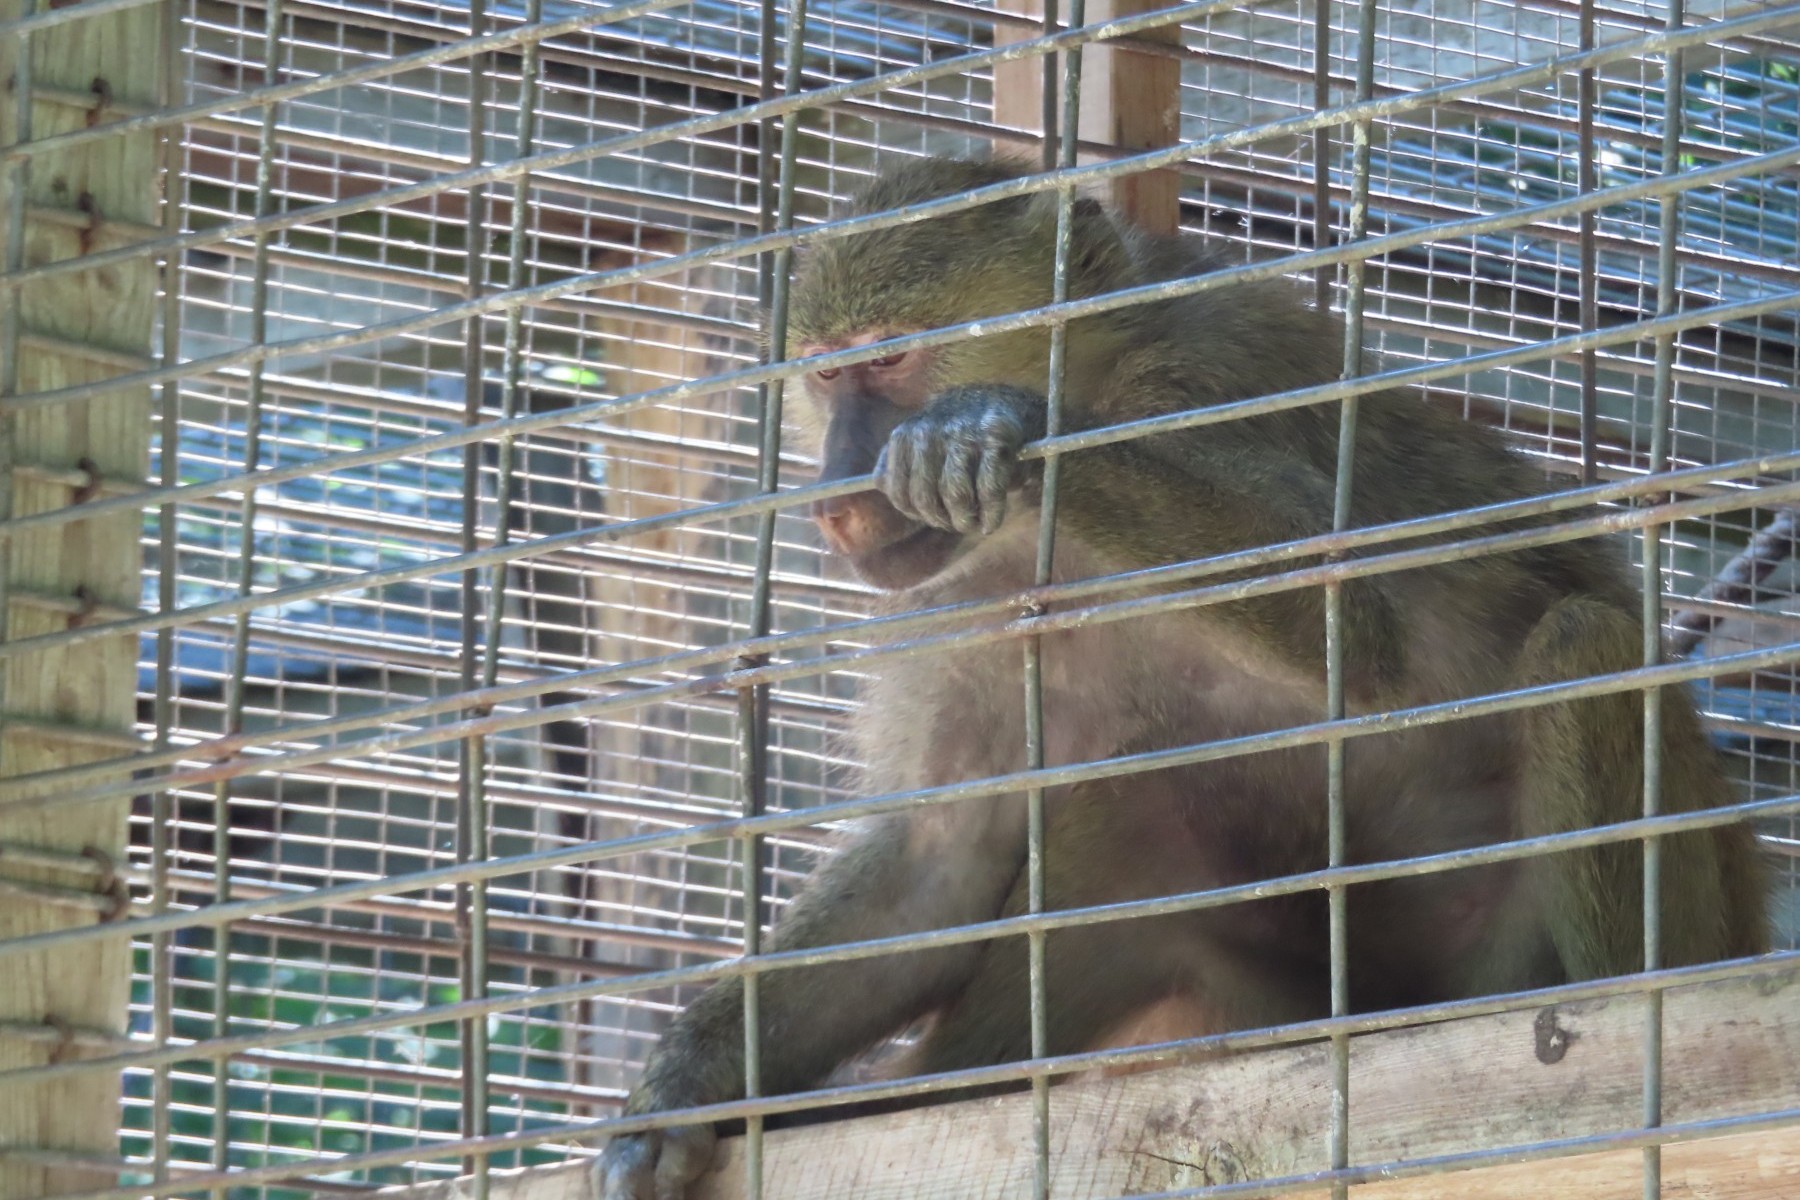 A baboon in a cage at a roadside zoo